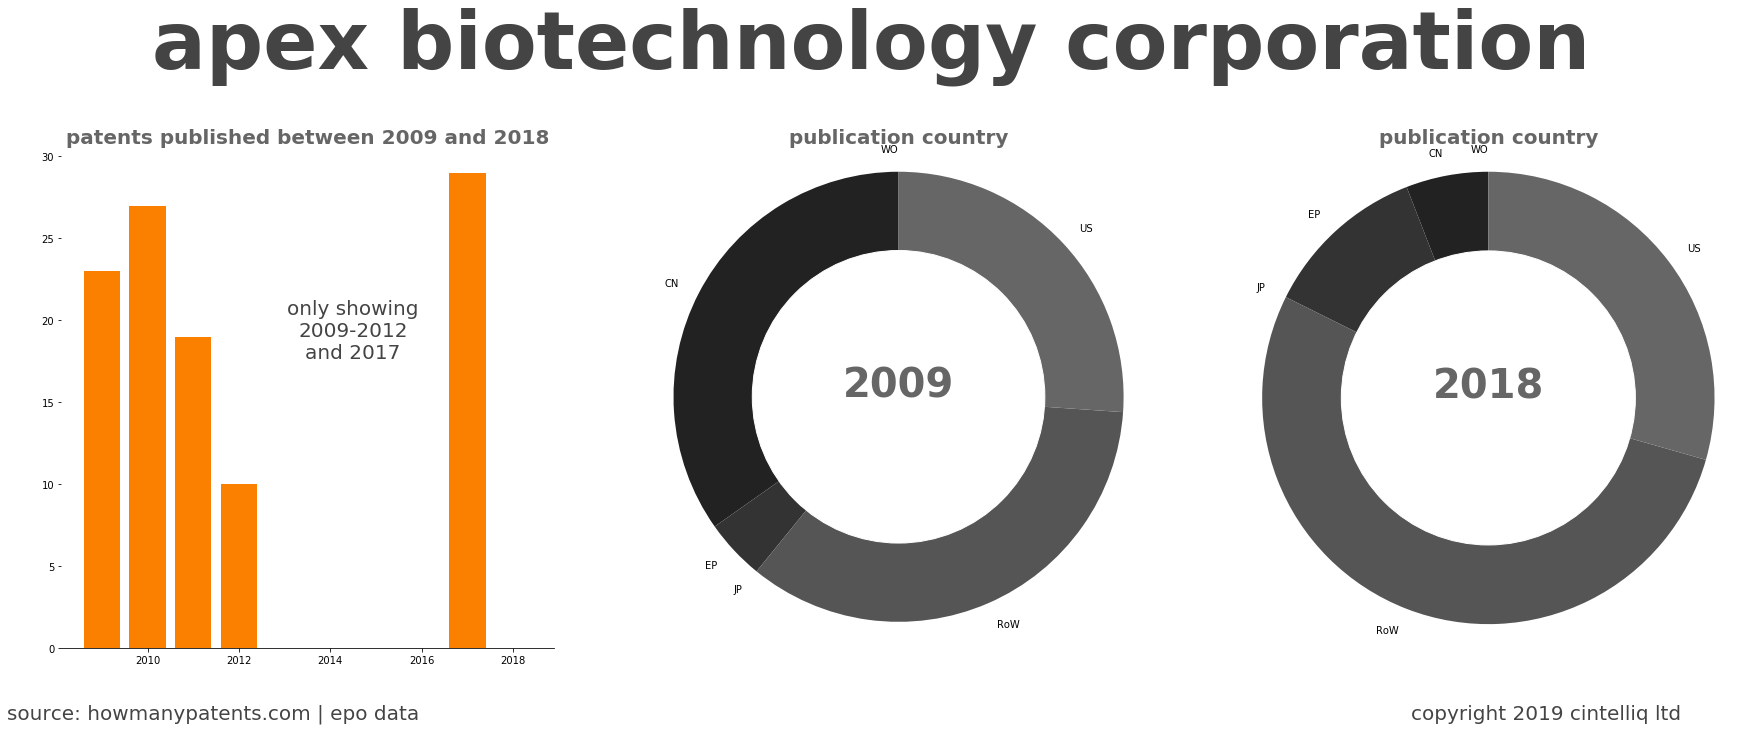 summary of patents for Apex Biotechnology Corporation